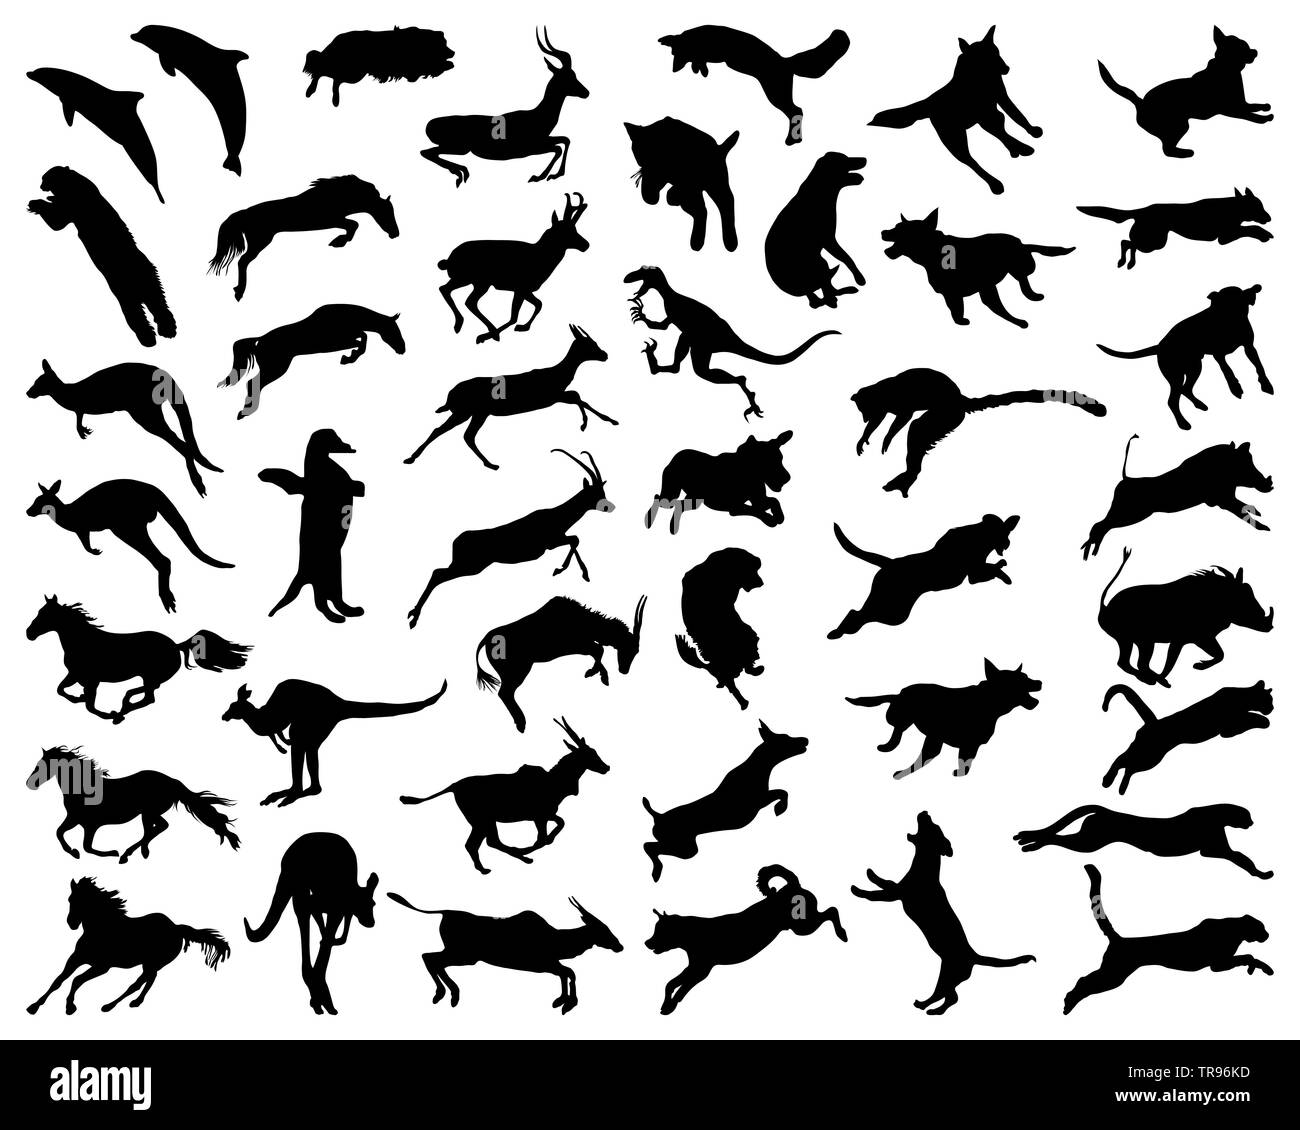 Black silhouettes of animals in a jump on a white background Stock Photo